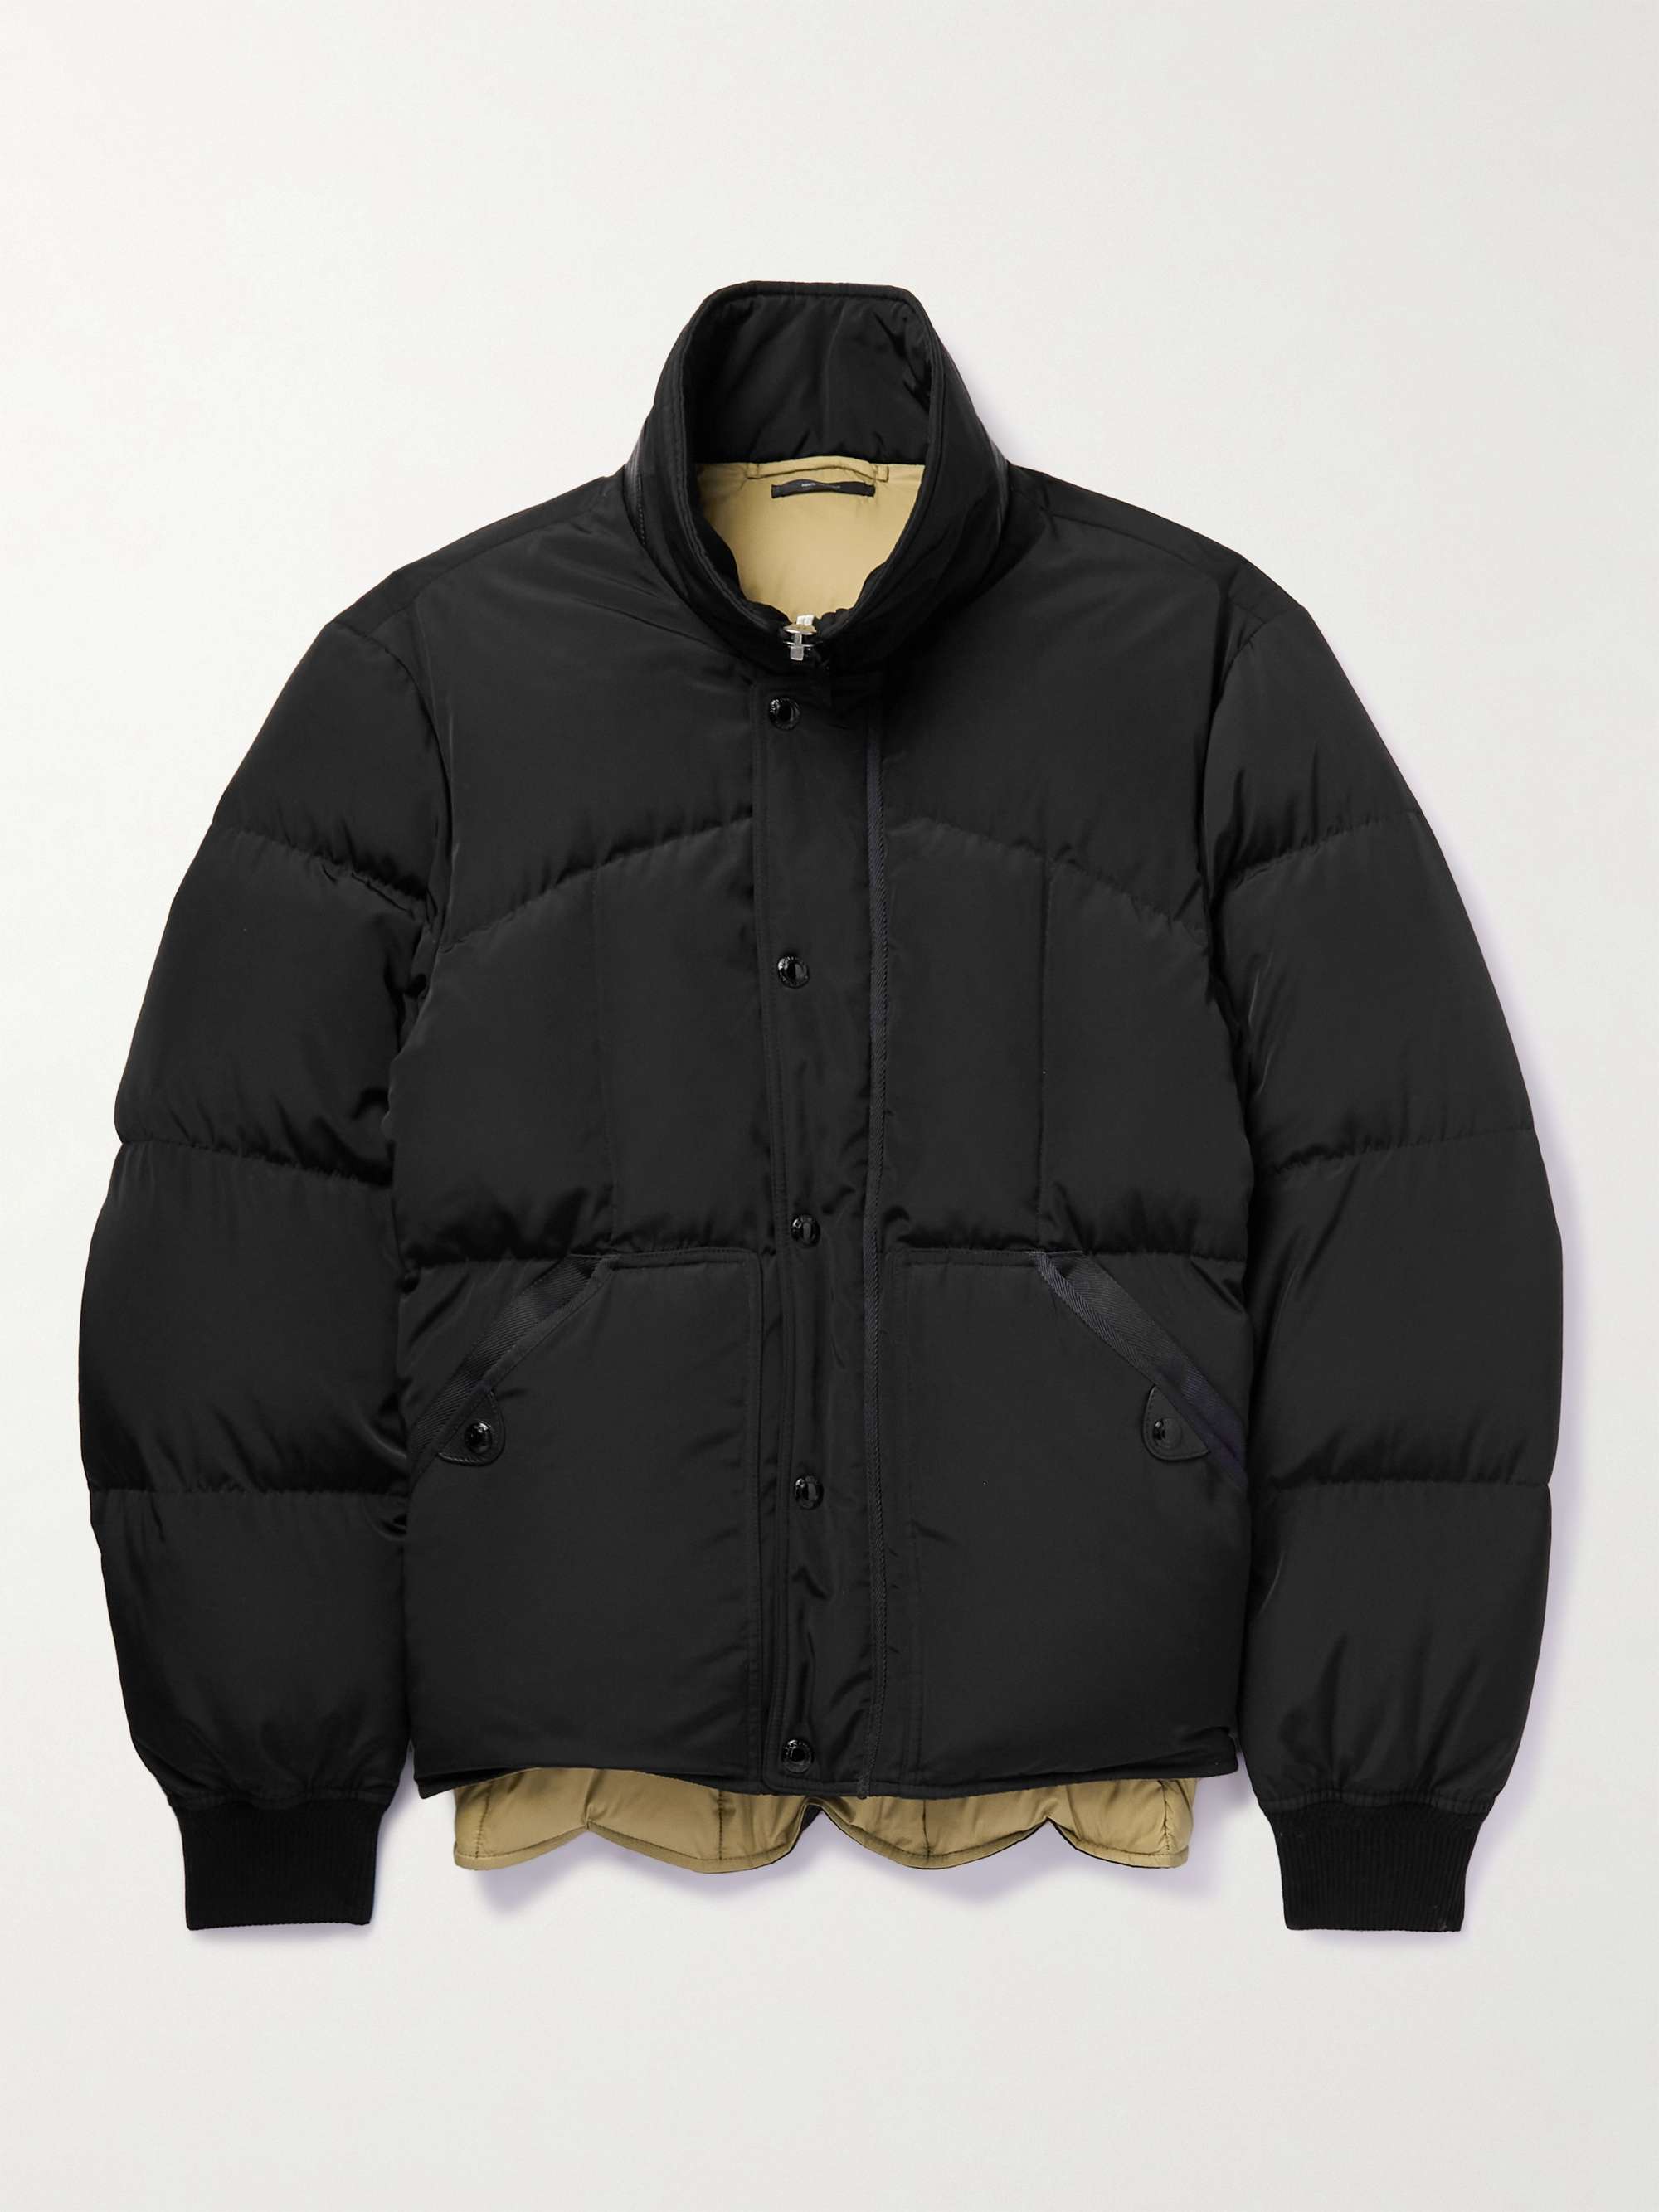 Tom Ford Leather and Webbing-Trimmed Quilted Shell Down Jacket - Men - Black Coats and Jackets - L